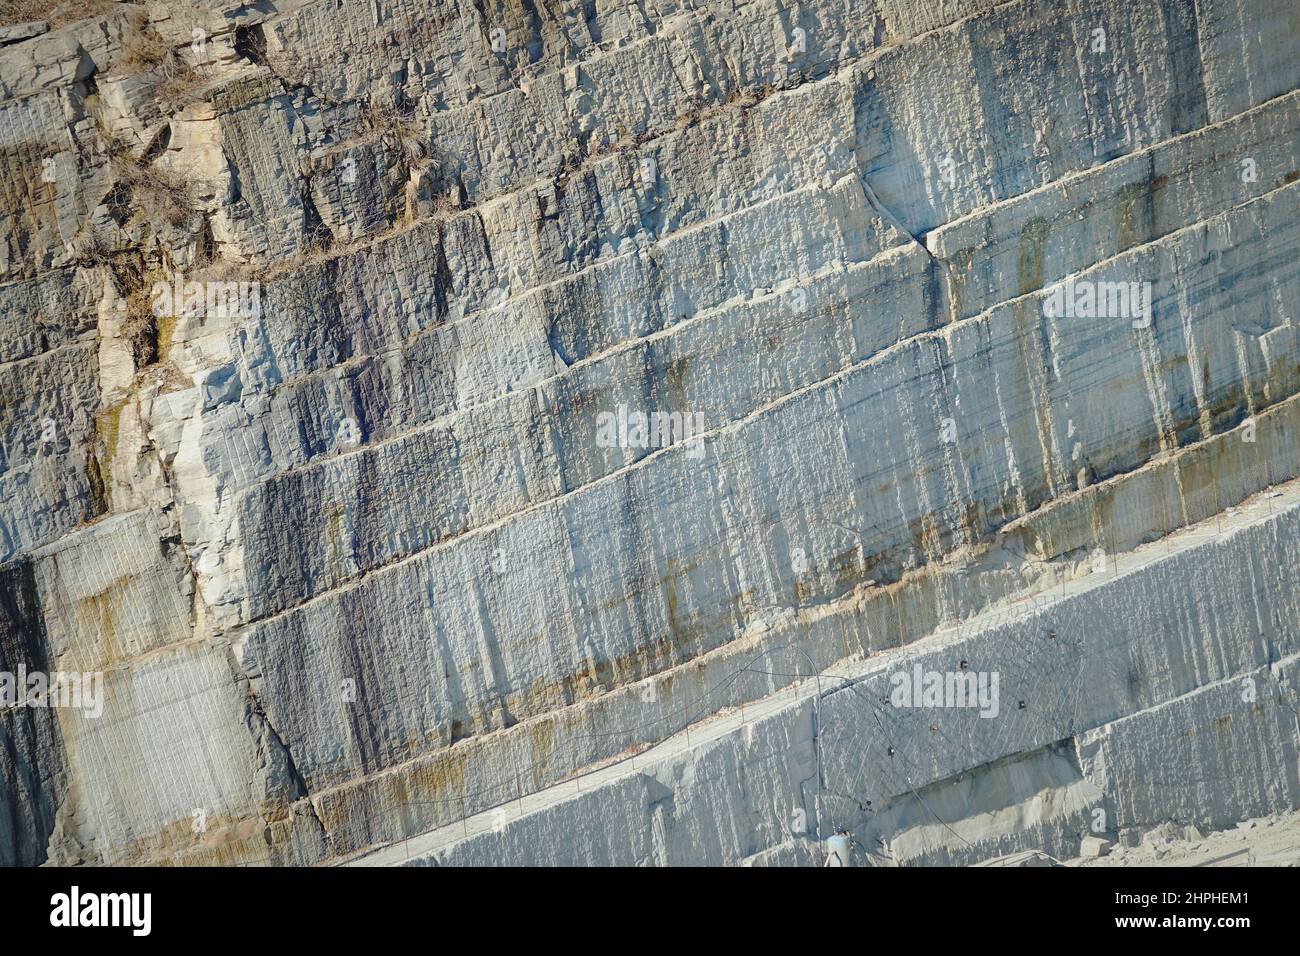 Quarry for the extraction of Luserna stone, a valuable rock that is mainly used for outdoor use in paving and cladding, balconies and stairs. Montoso, Stock Photo